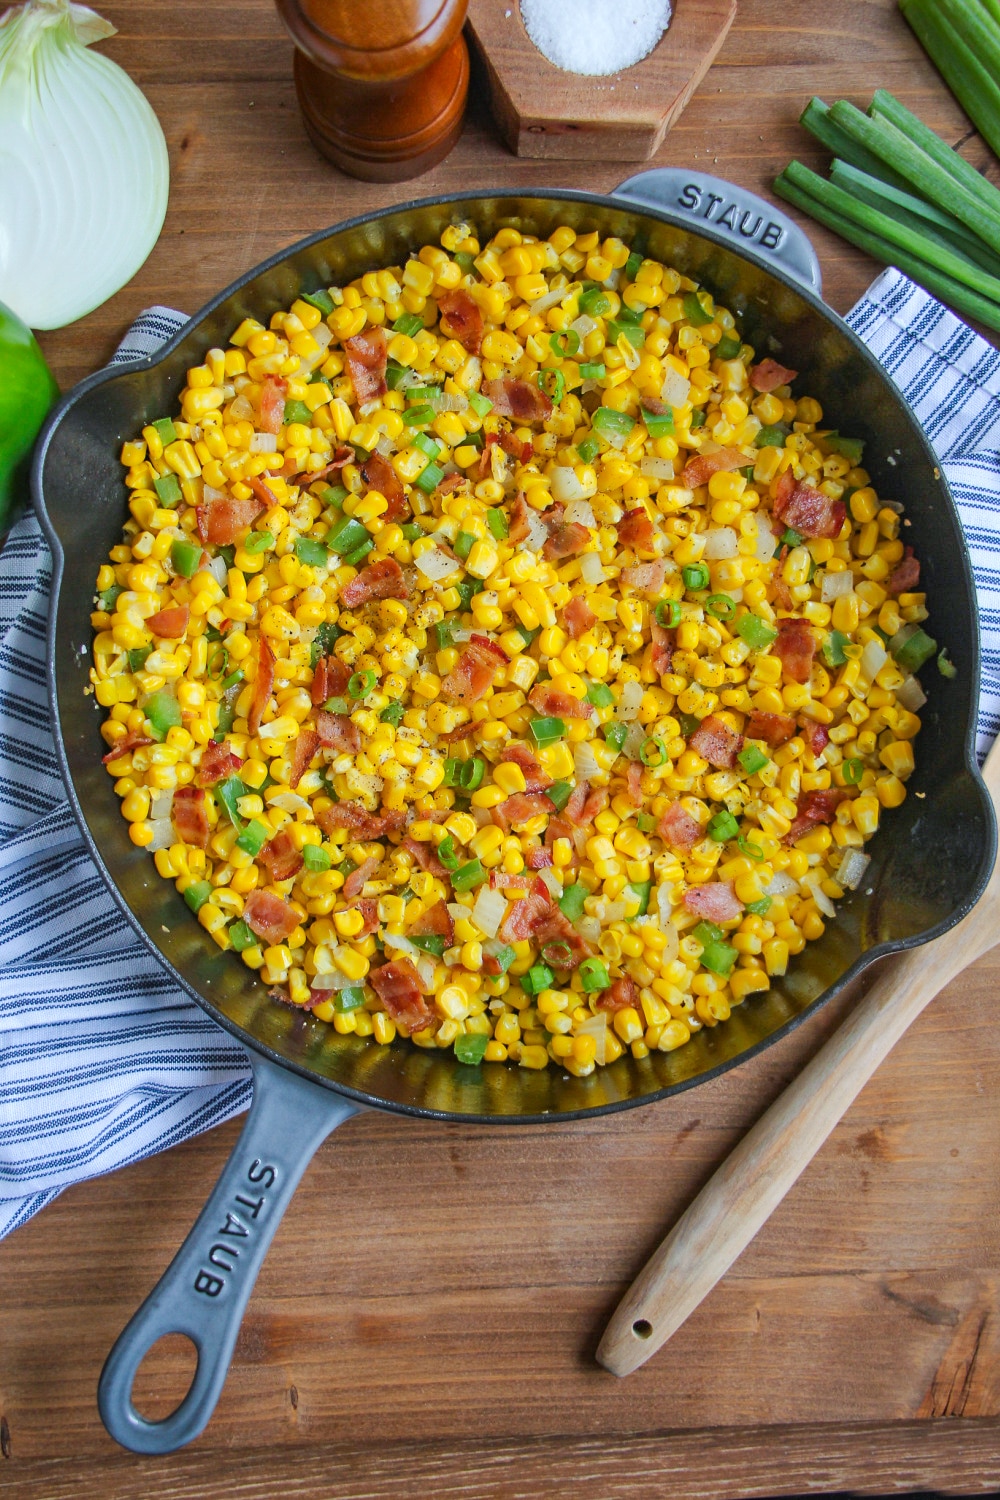 A cast iron skillet filed with Southern Fried Corn and garnished with scallions.